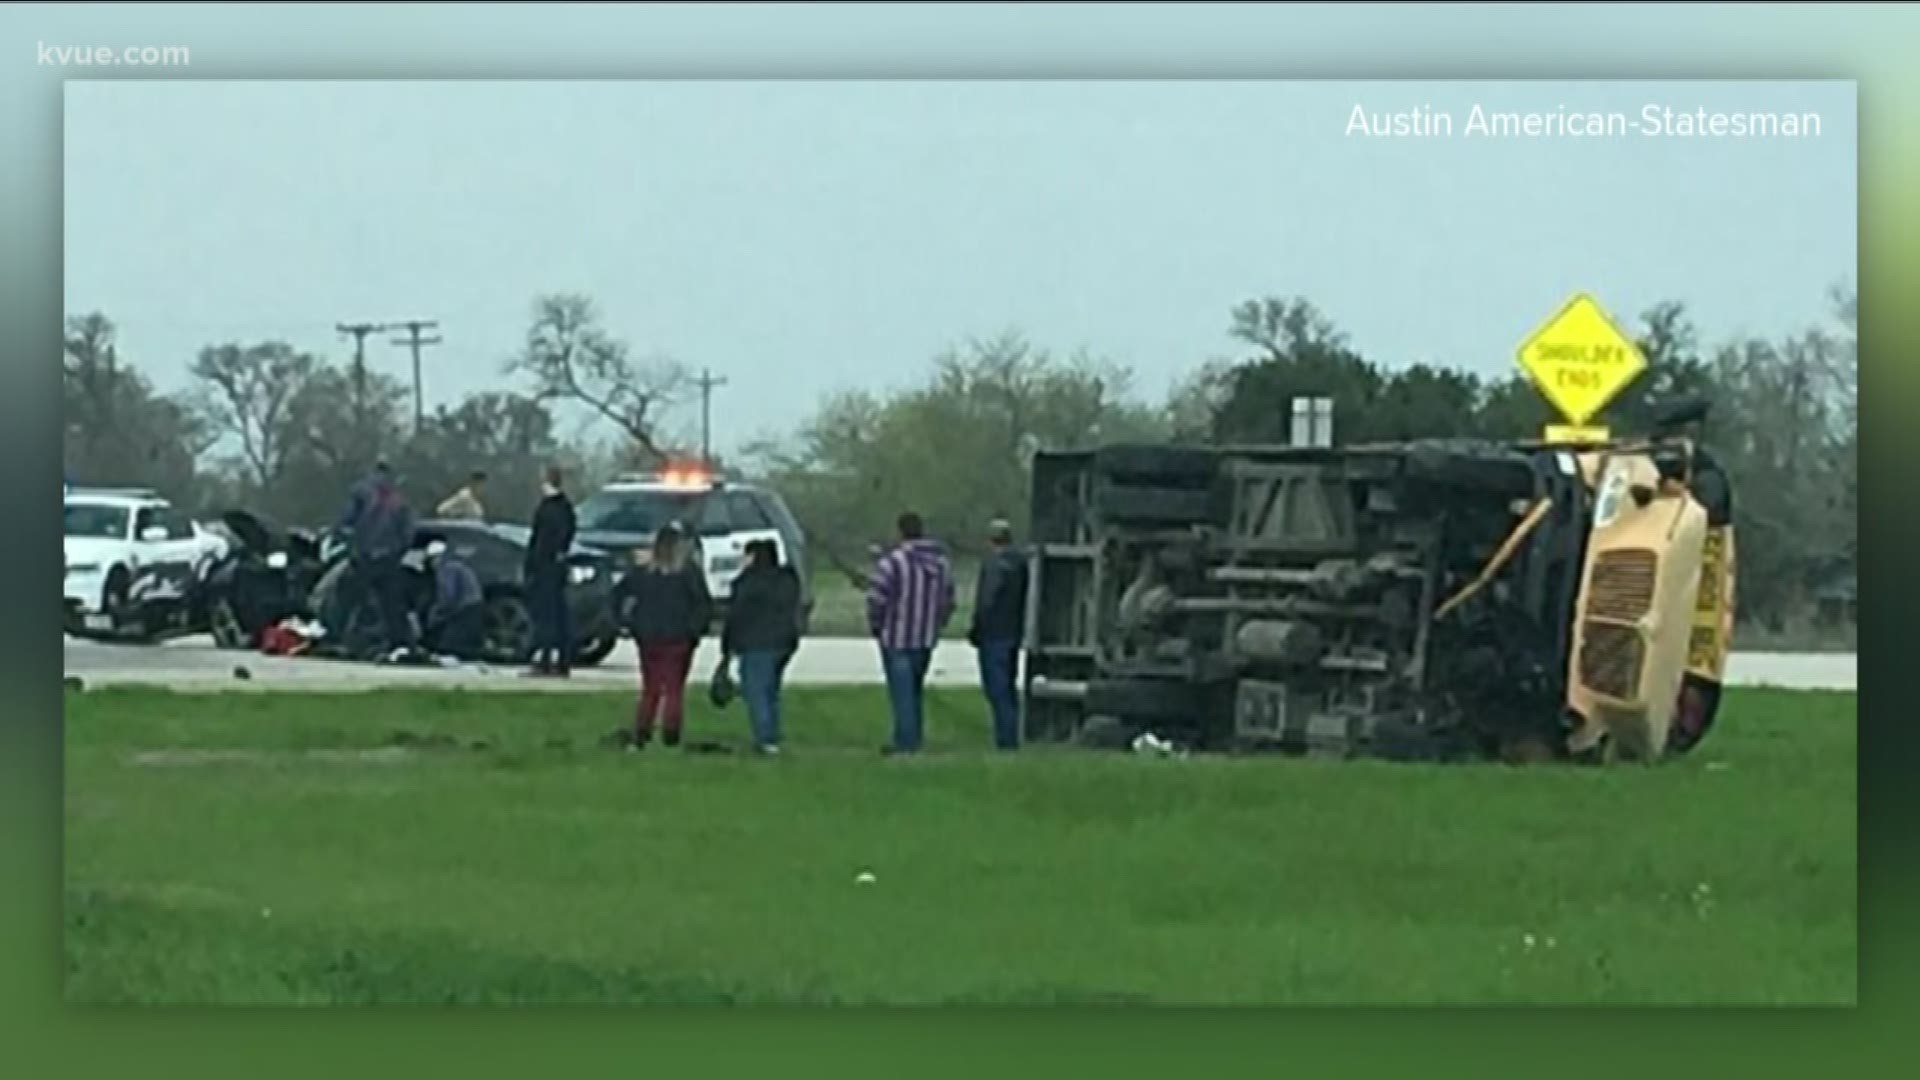 It happened just after noon at the intersection of FM 535 and FM 20 in Bastrop County.